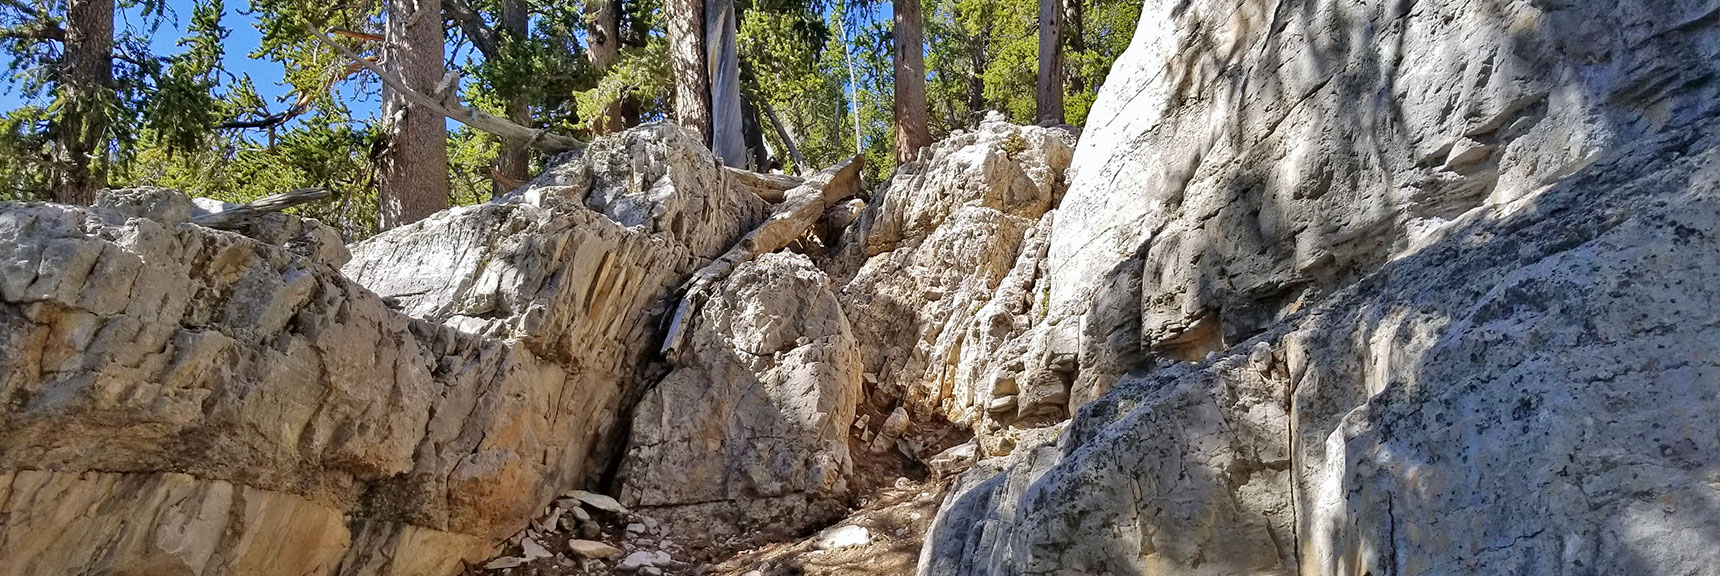 Brief and Tame Class 3 Climbing Section Above Mummy Springs | Mummy Mountain's Toe, Mt. Charleston Wilderness, Nevada